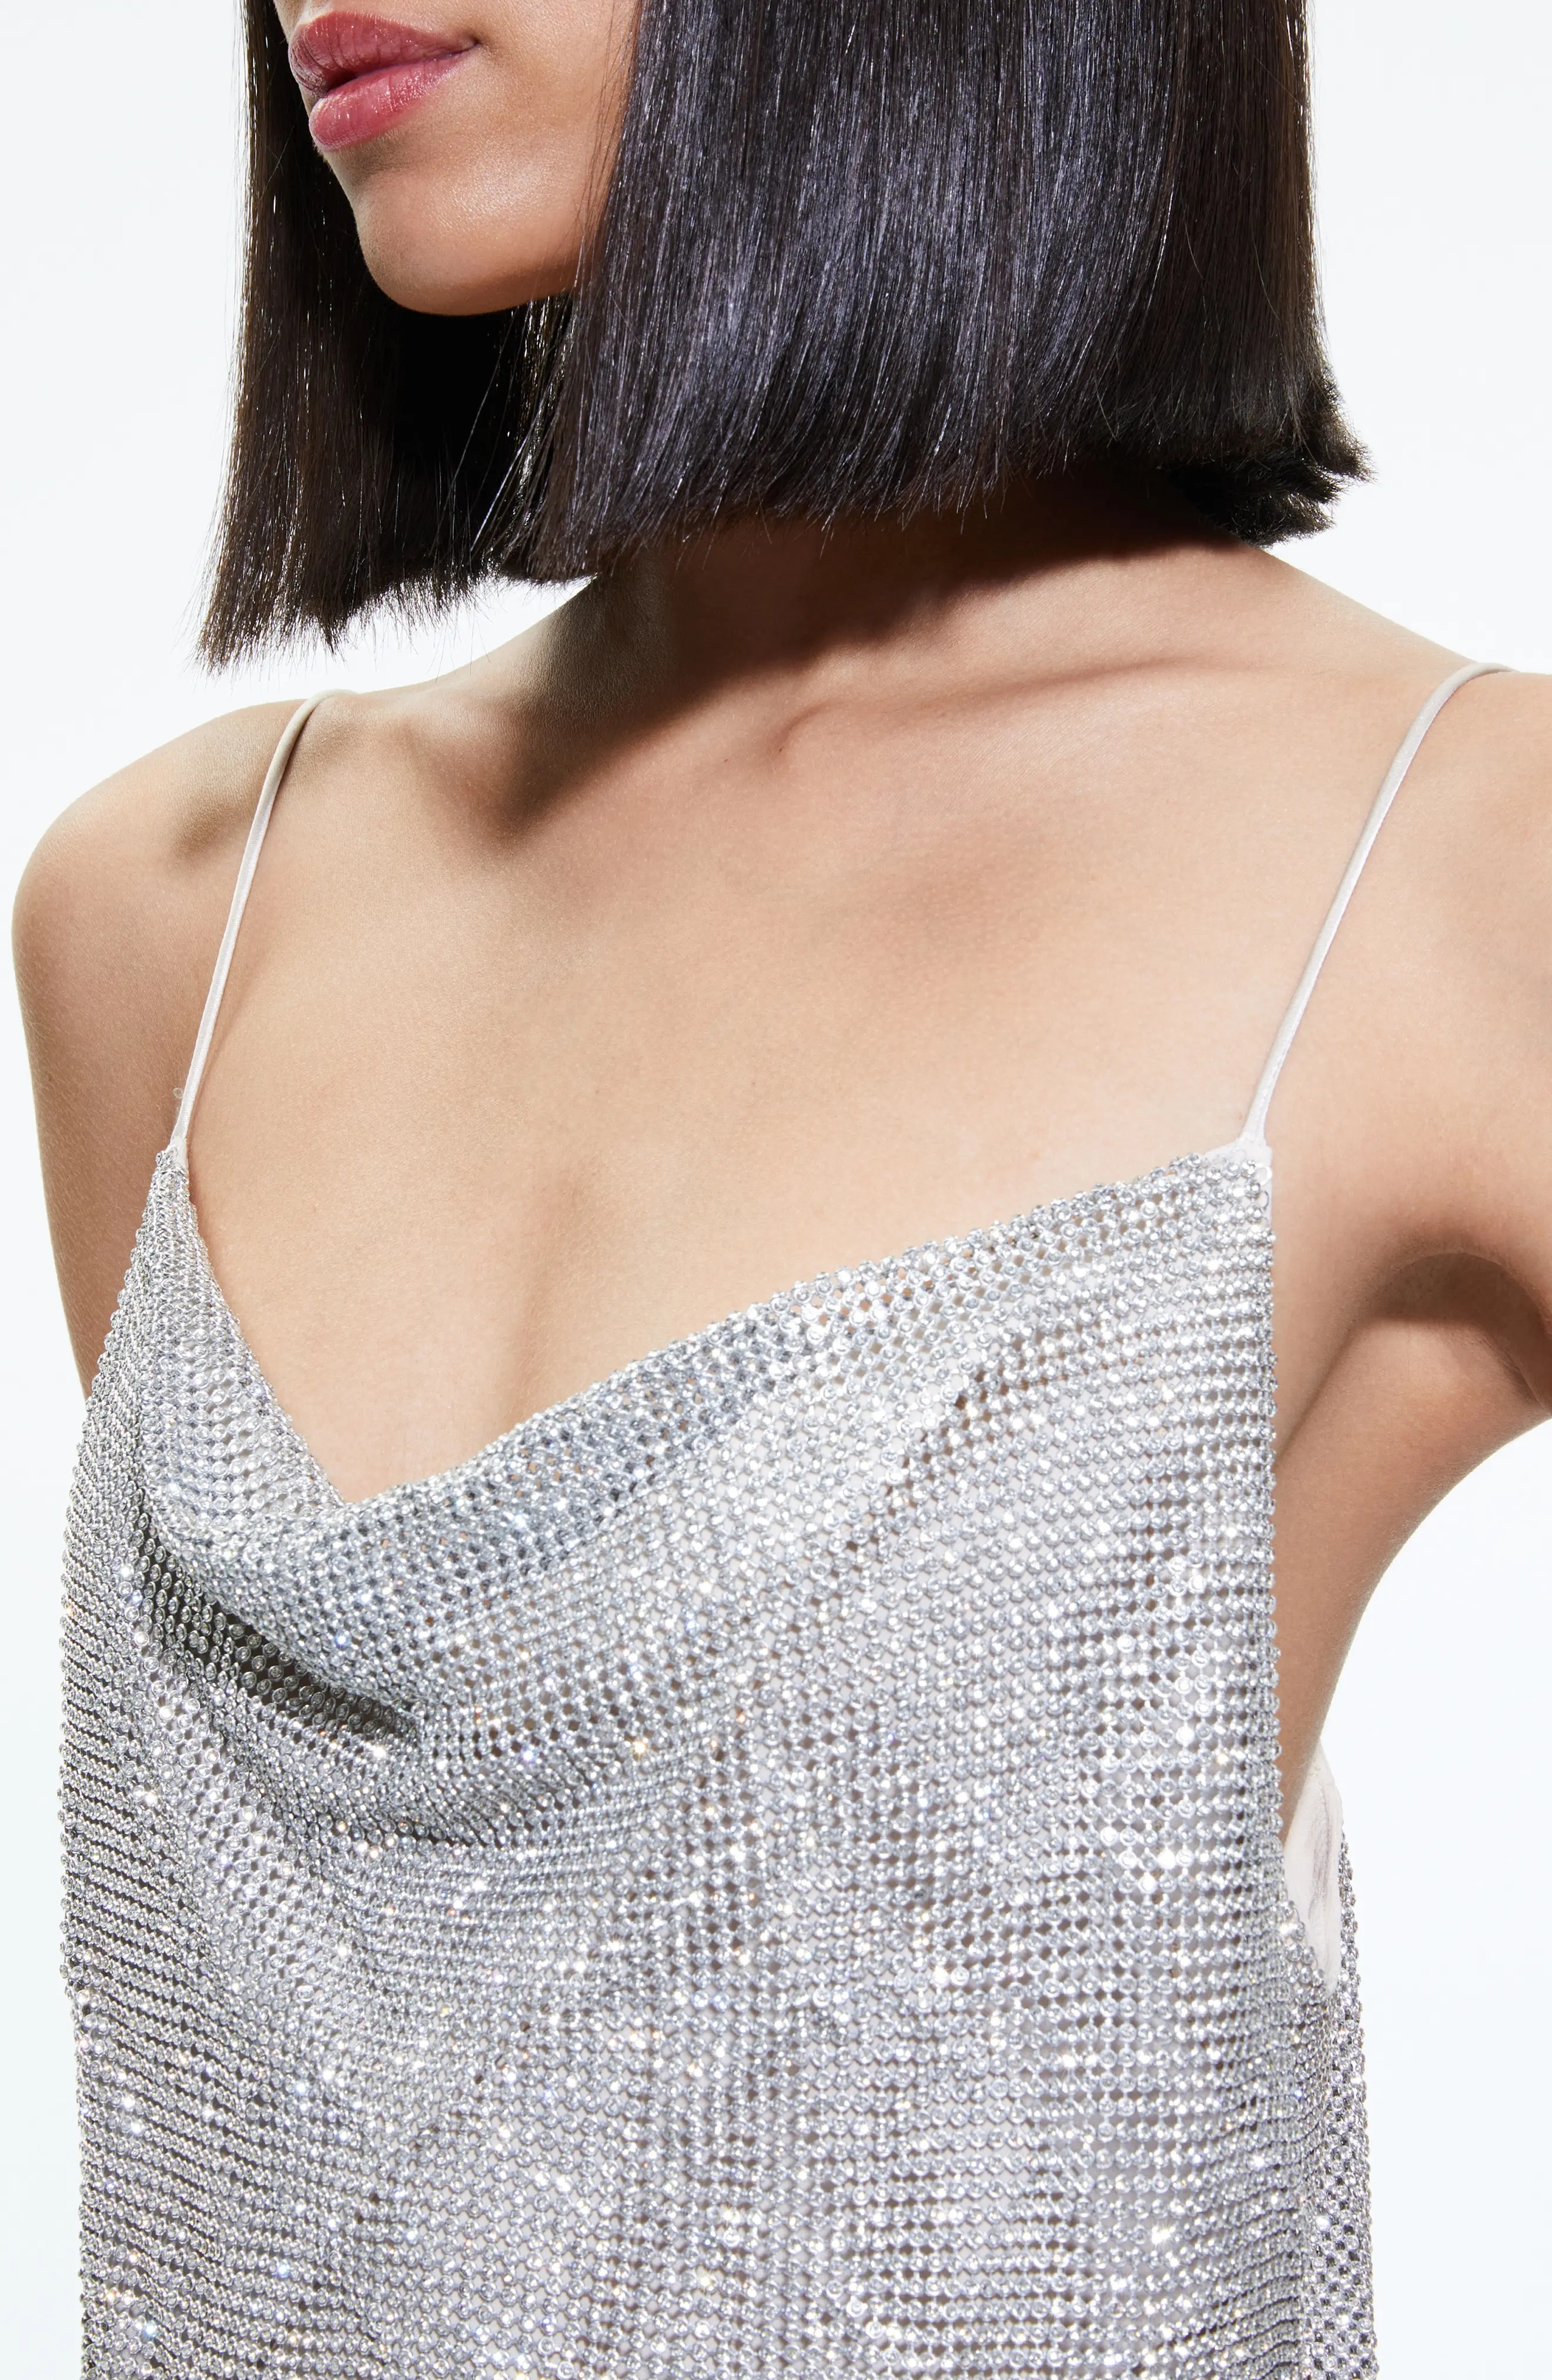 Harmon Crystal Chain Mail Cowl Neck Camisole in Silver/Chainmail - 3